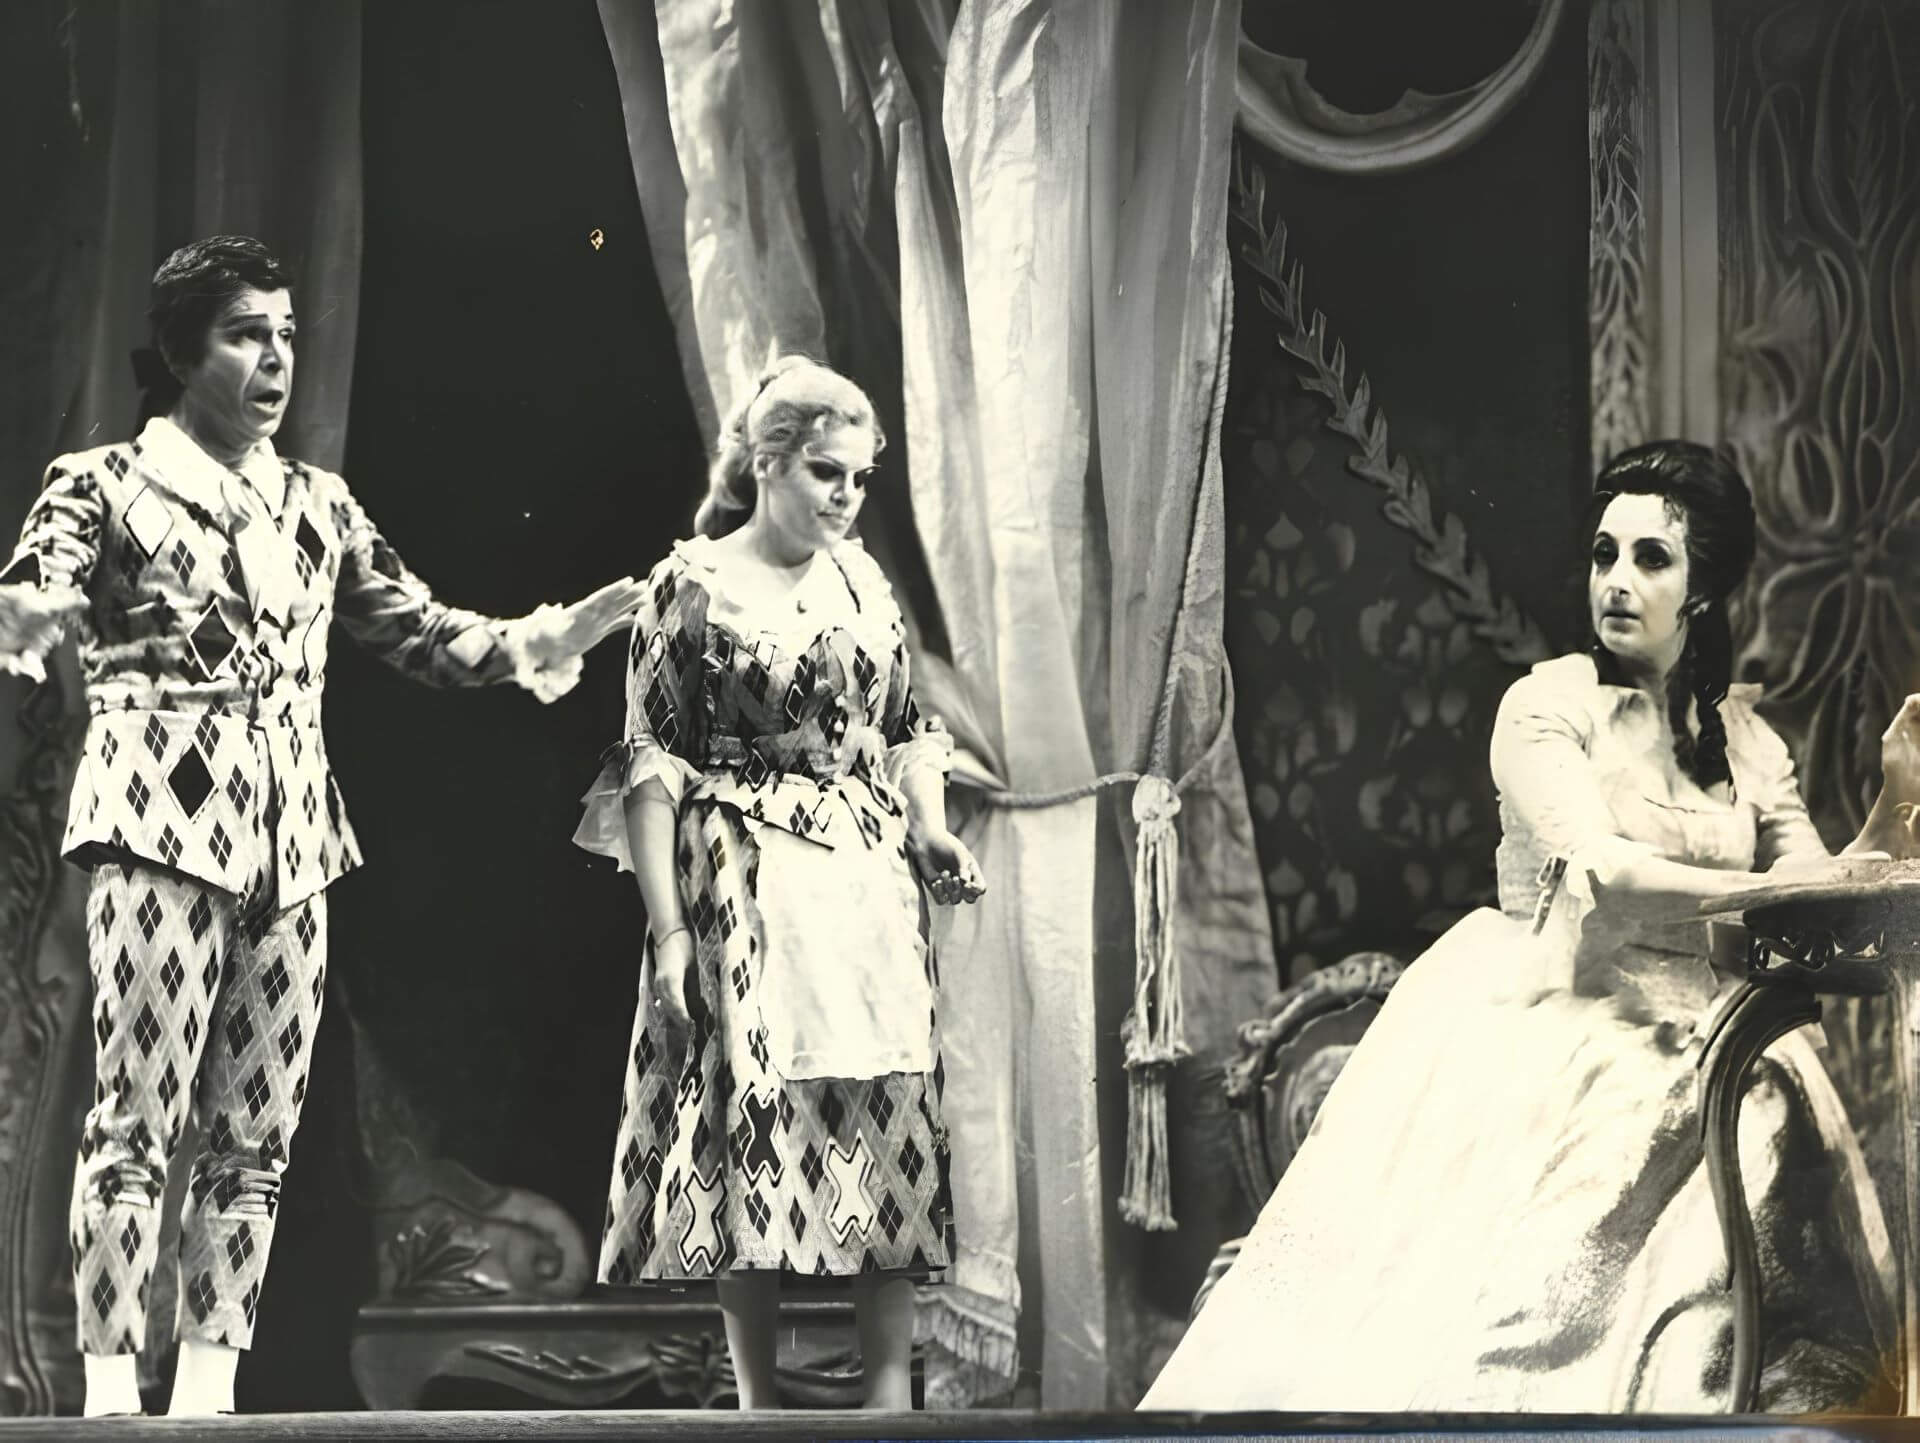 Snapshot from GNO’s production of Wolfgang Amadeus Mozart’s Le nozze di Figaro conducted by Dimitris Chorafas, Alkis Baltas and directed by René Terrason, Olympia Theatre (1979/80)